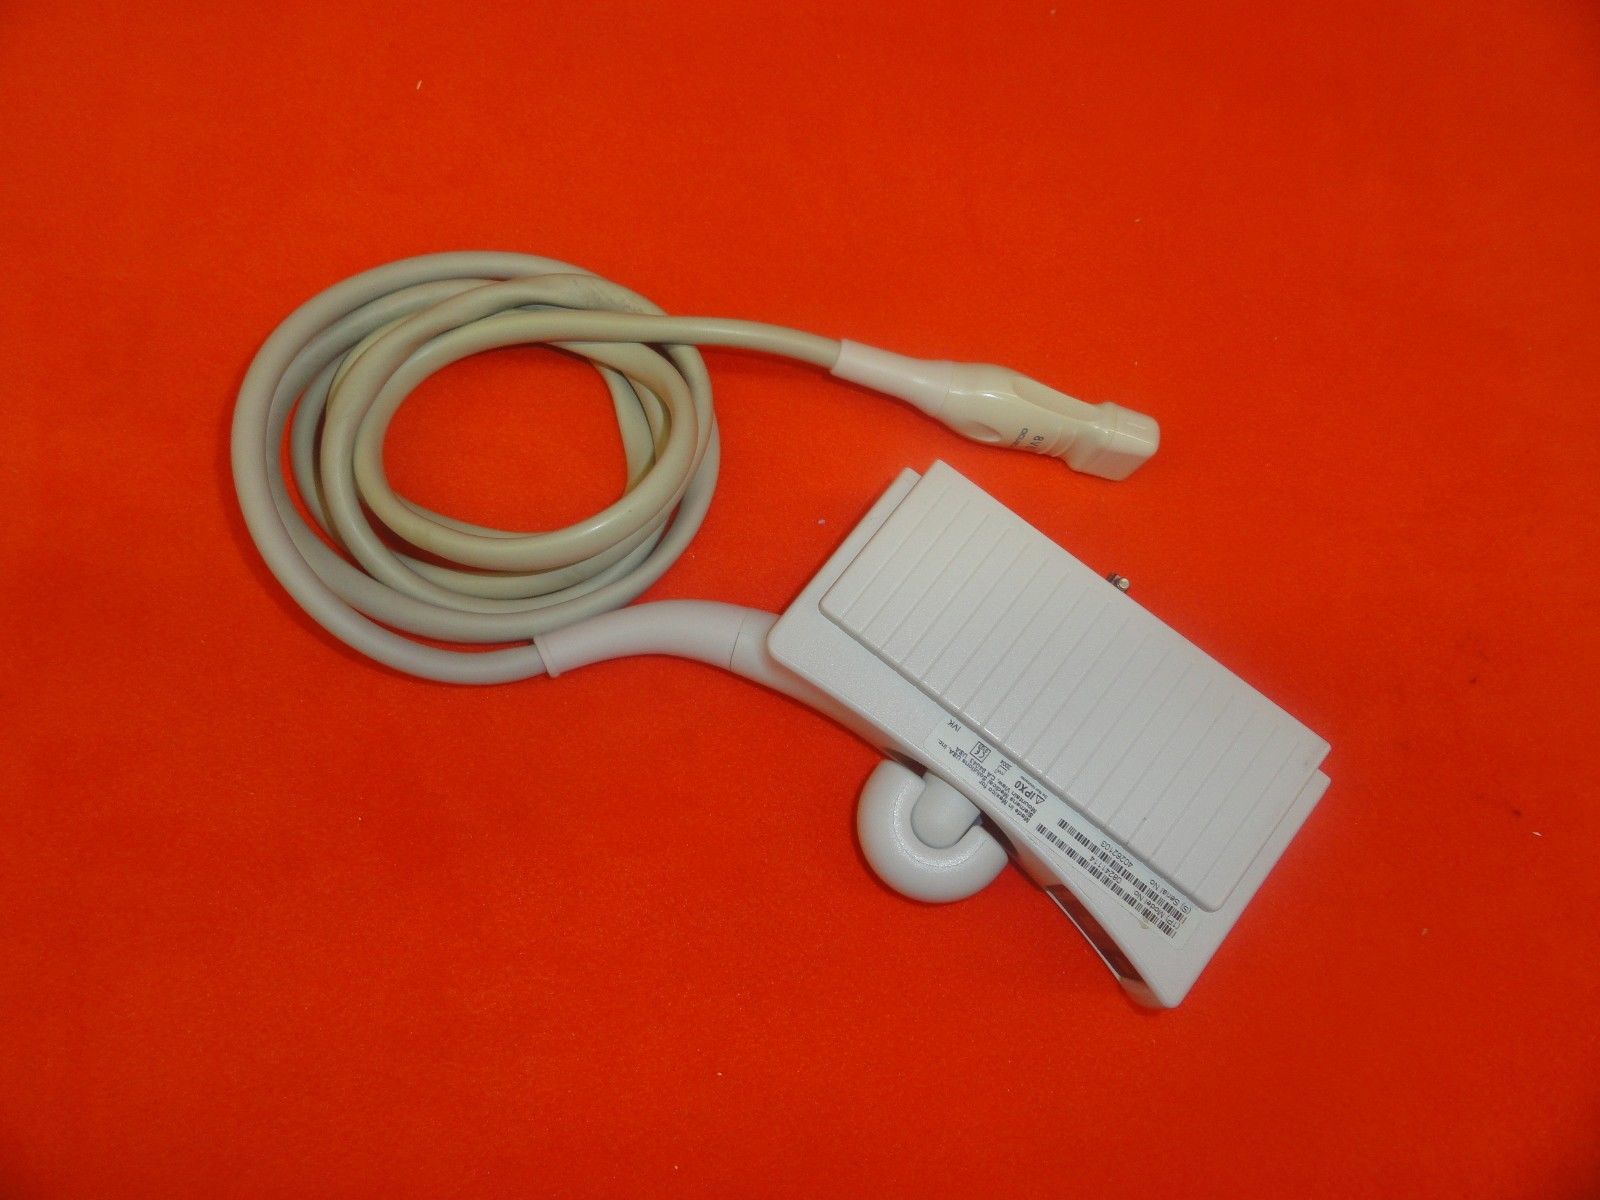 2004 Siemens Acuson 8V5 P/N 0824114 Ultrasound Probe W/ Pin-less connector (5812 DIAGNOSTIC ULTRASOUND MACHINES FOR SALE